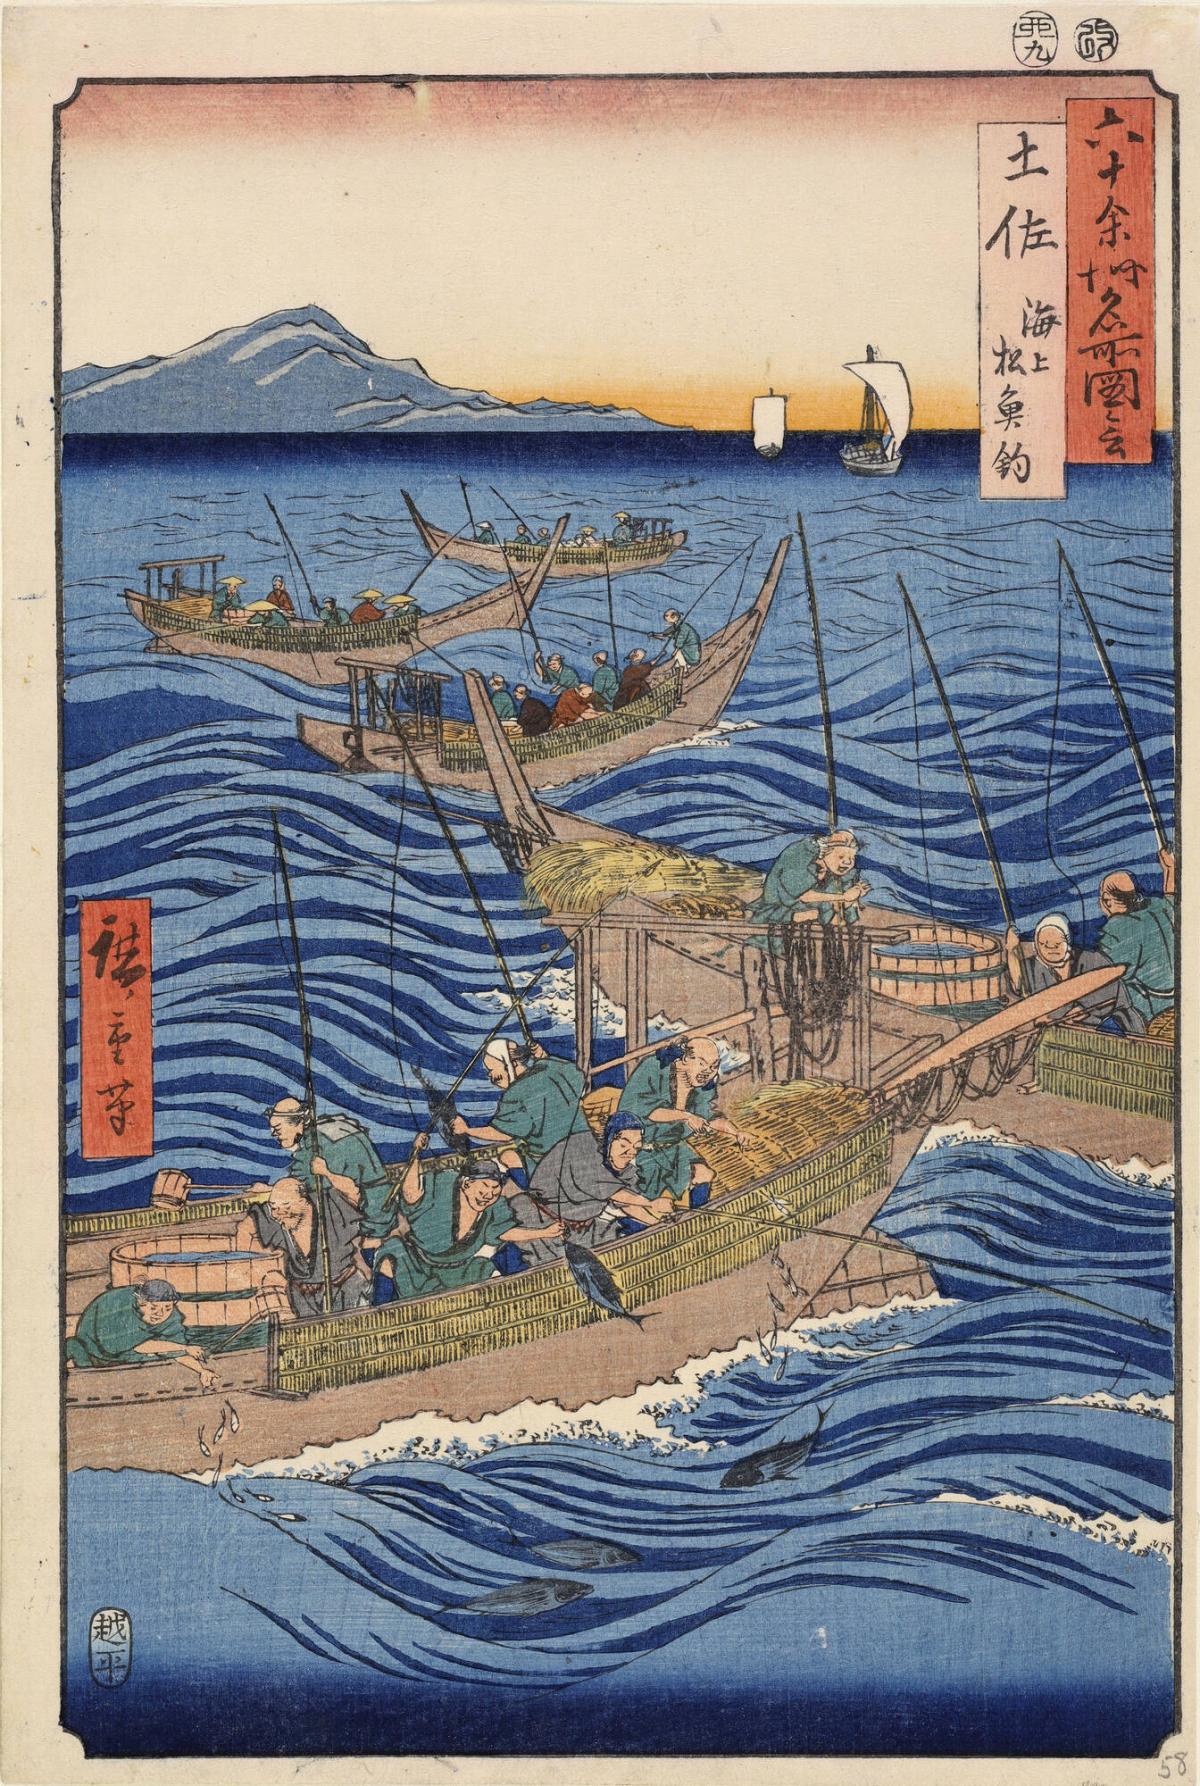 Fishing for Bonito off the Coast of Tosa Province, no. 58 from the series Pictures of Famous Places in the Sixty-odd Provinces